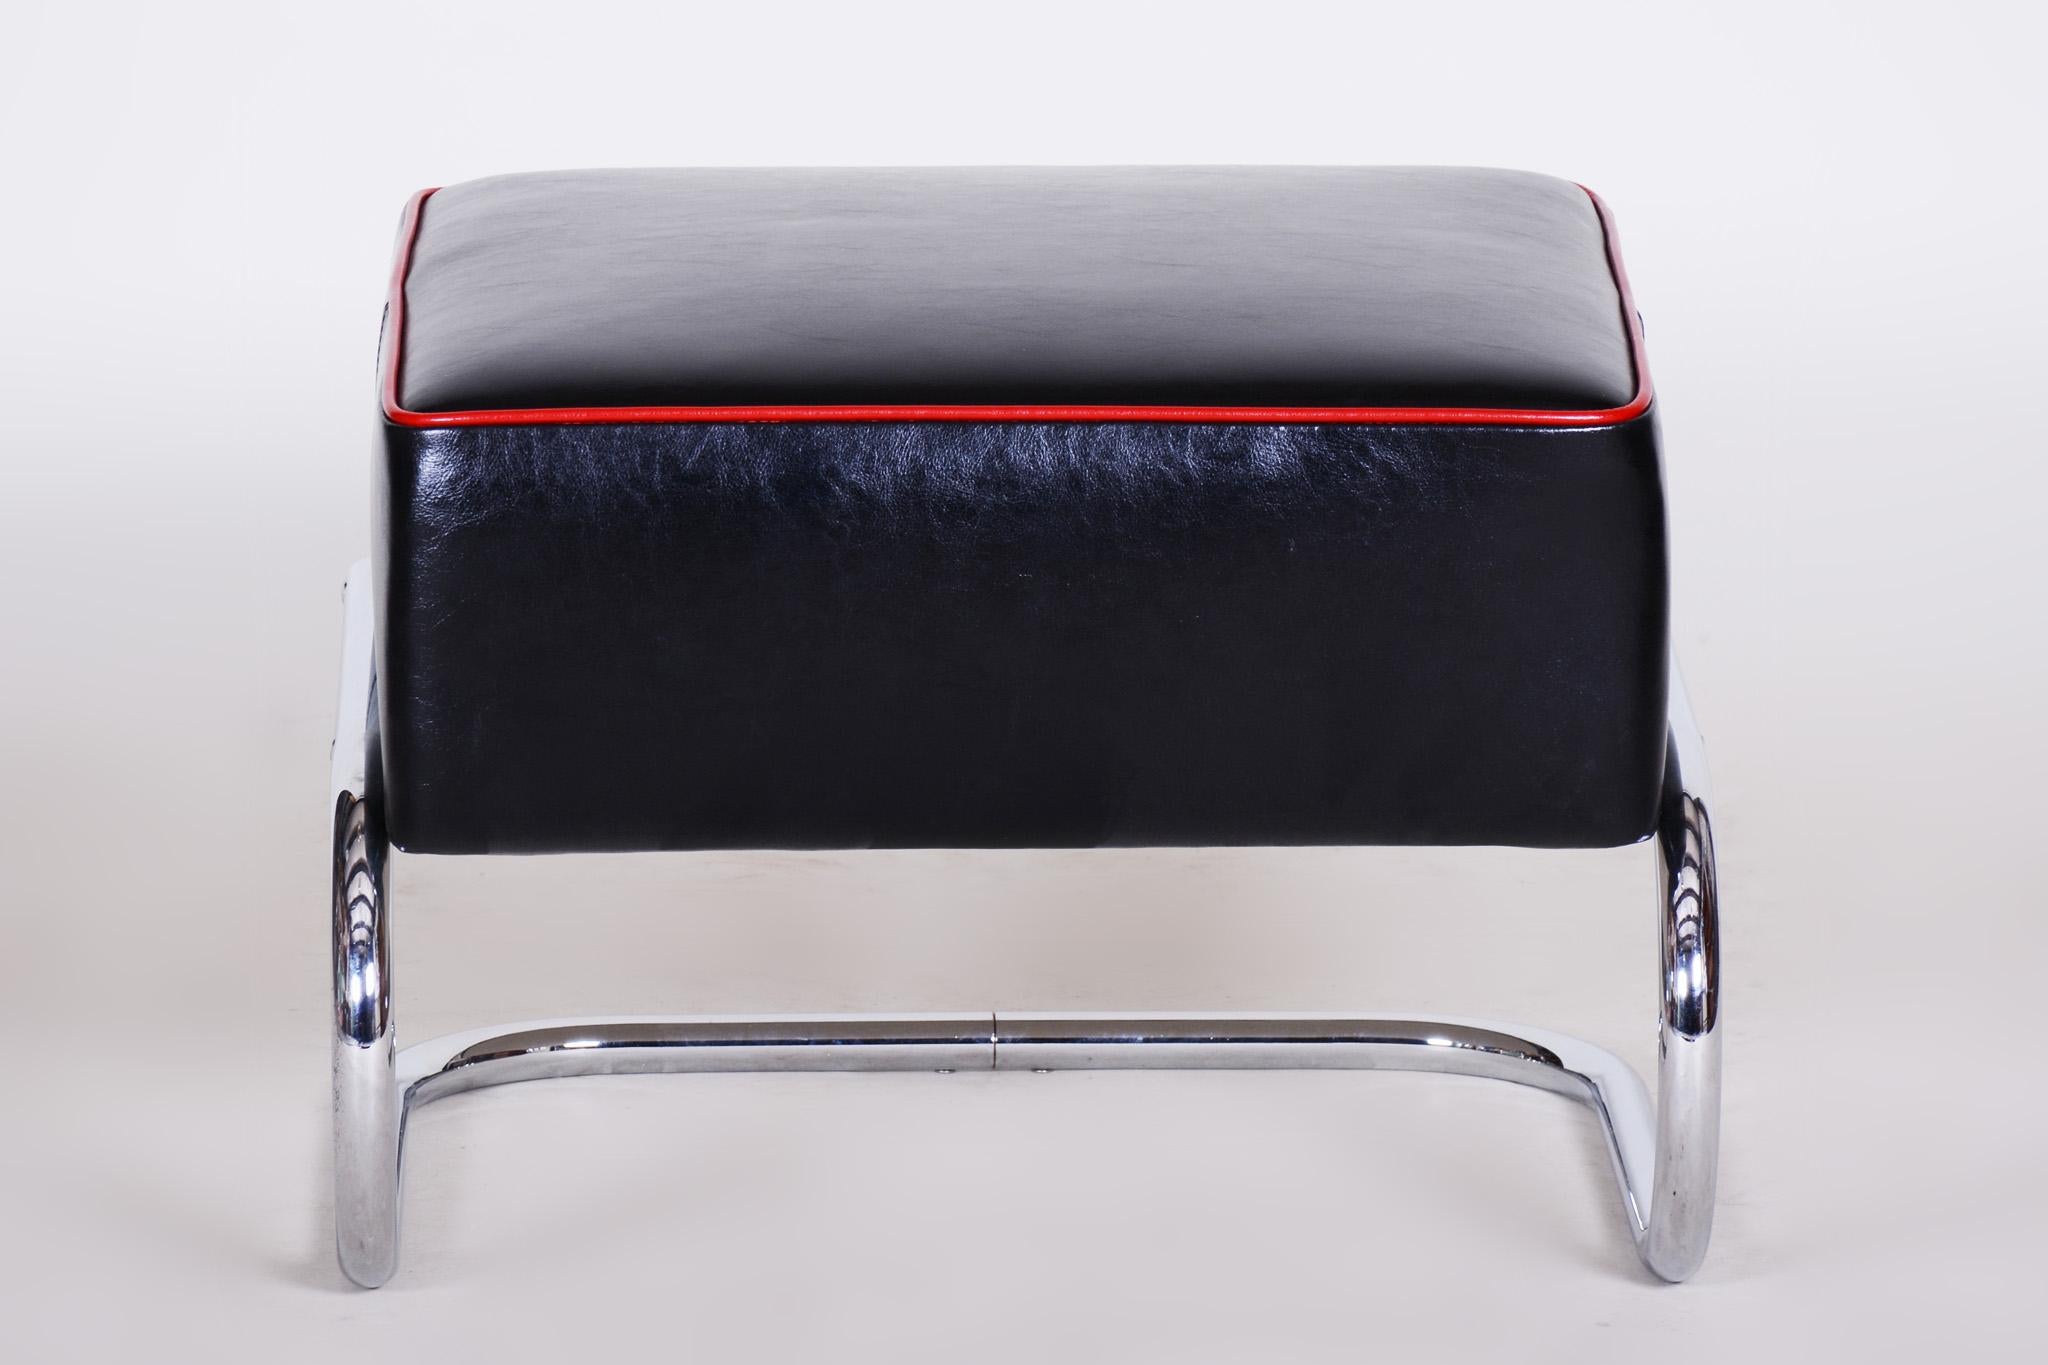 Modernist Bauhaus - Art Deco chrome tabouret.
Completely restored, new upholstery and leather.
Maker: Slezák Company
Source Czechia
Period: 1930-1939.